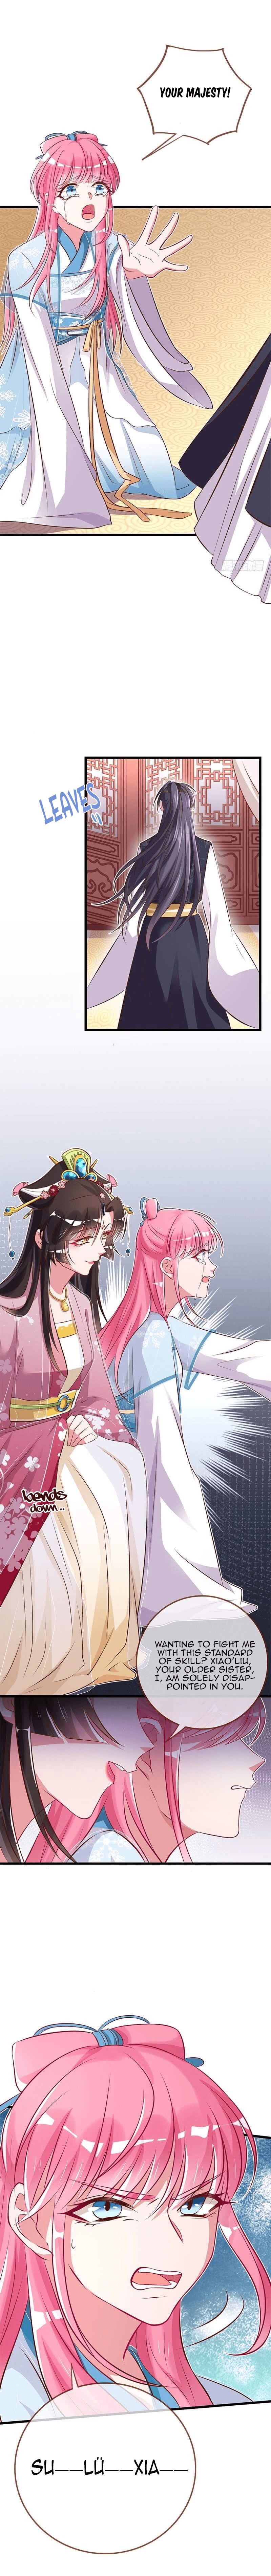 Cheating Men Must Die Ch. 5 The Palace Harem is a Mess Bitch, your older sister, I, am solely disappointed in you